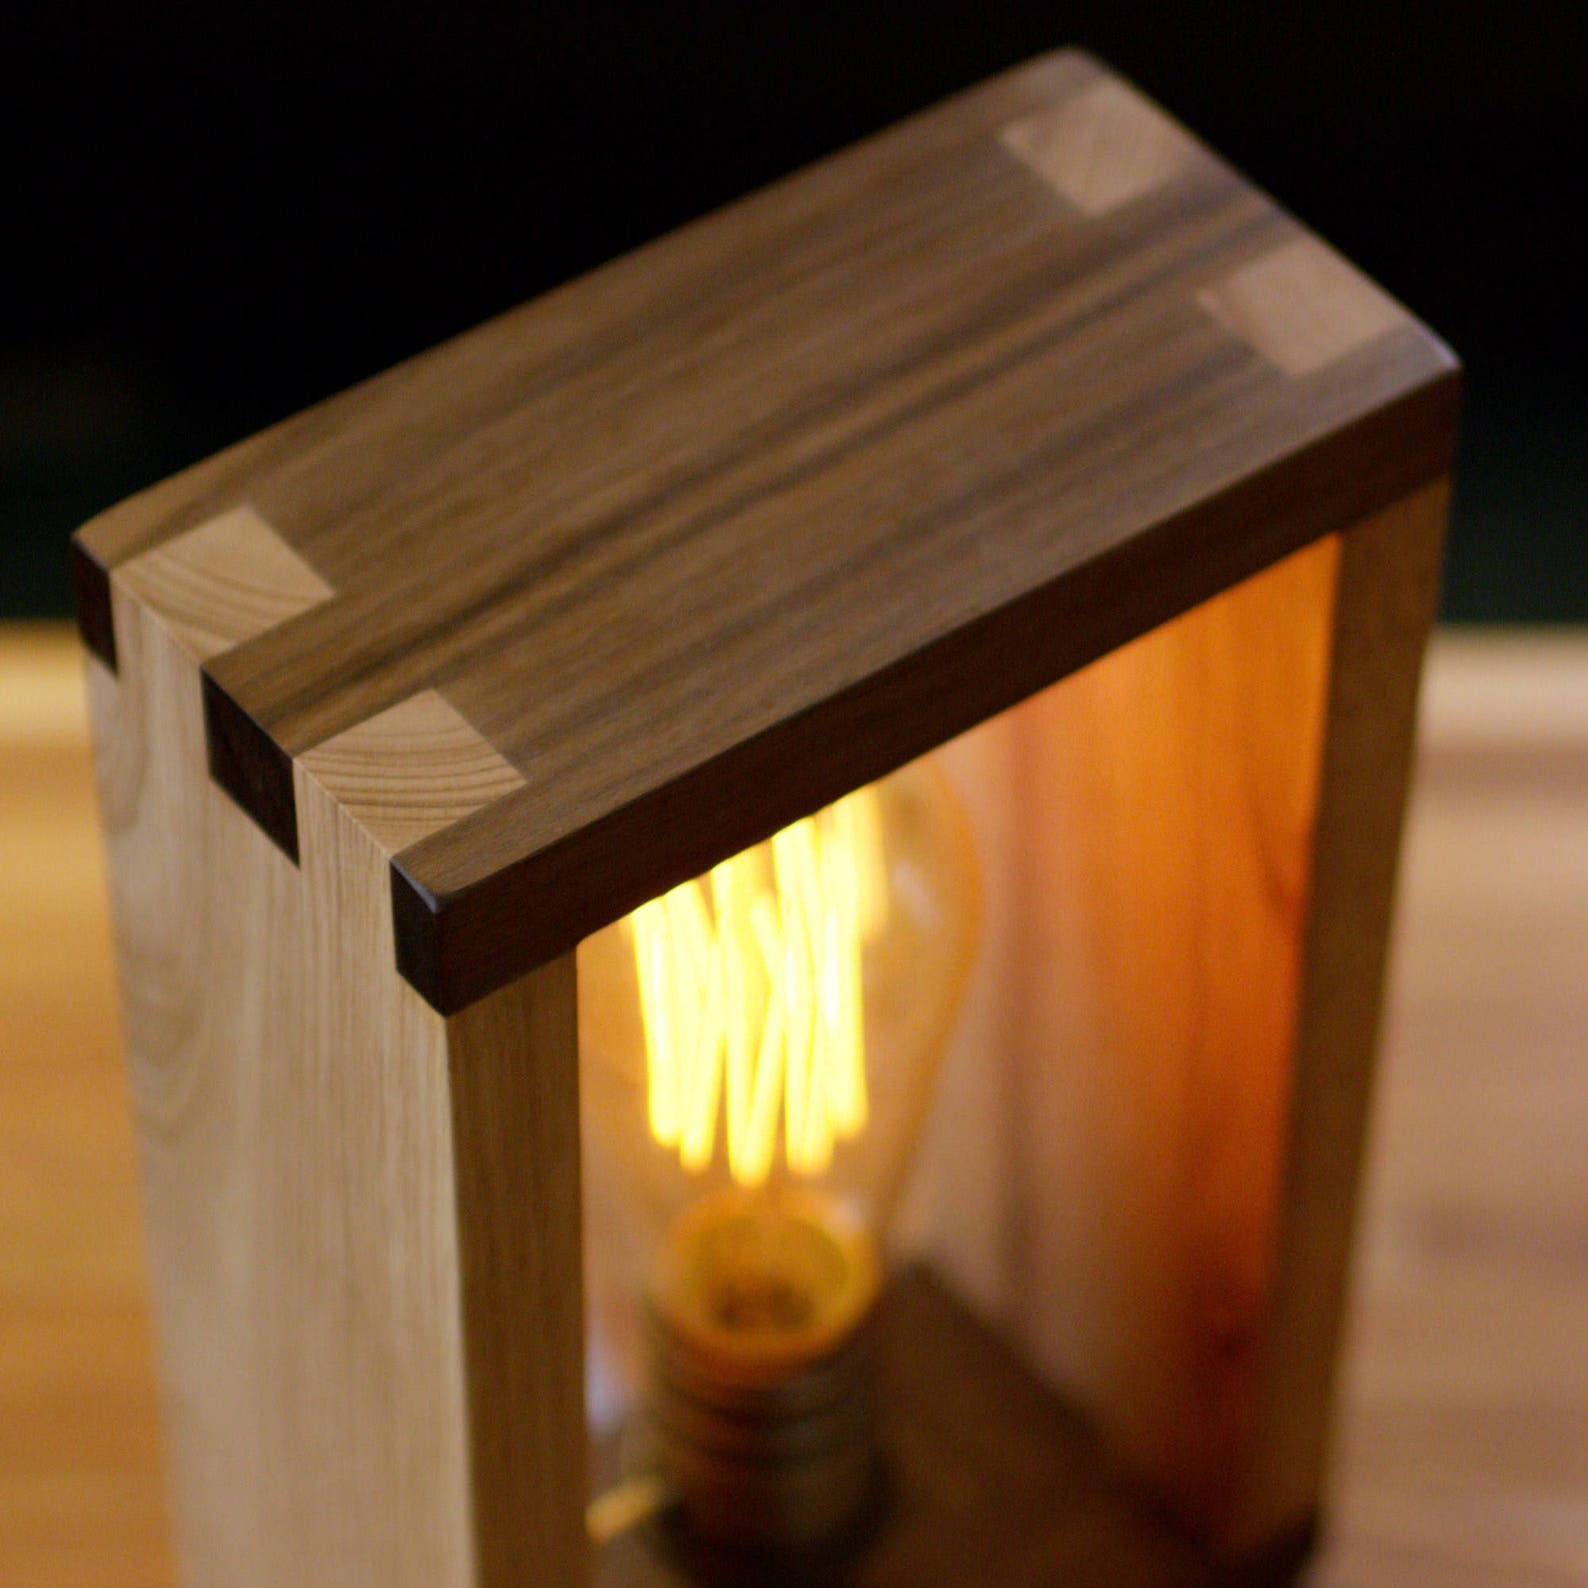 The Alto Lamp: Classic Wood Shadow Box Desk Lamp With Cotton - Etsy